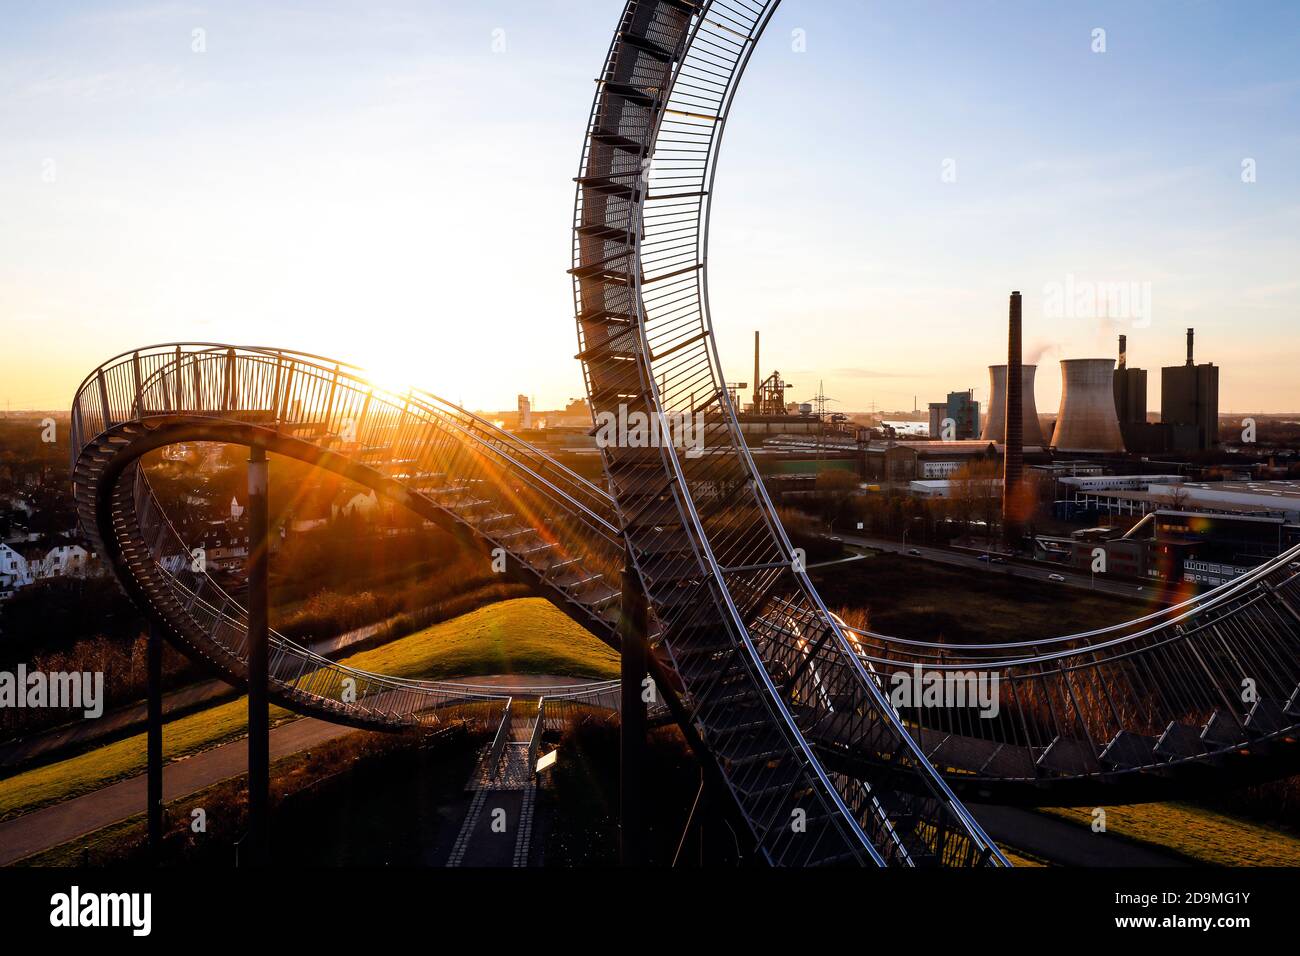 Tiger and Turtle, Magic Mountain is a landmark modeled on a roller coaster, the large sculpture is an accessible work of art by Heike Mutter and Ulrich Genth, which was developed as part of the Ruhr 2010 Capital of Culture, behind the HKM Hüttenwerke Krupp Mannesmann and RWE Power AG, Duisburg, Ruhr area, North Rhine-Westphalia, Germany Stock Photo